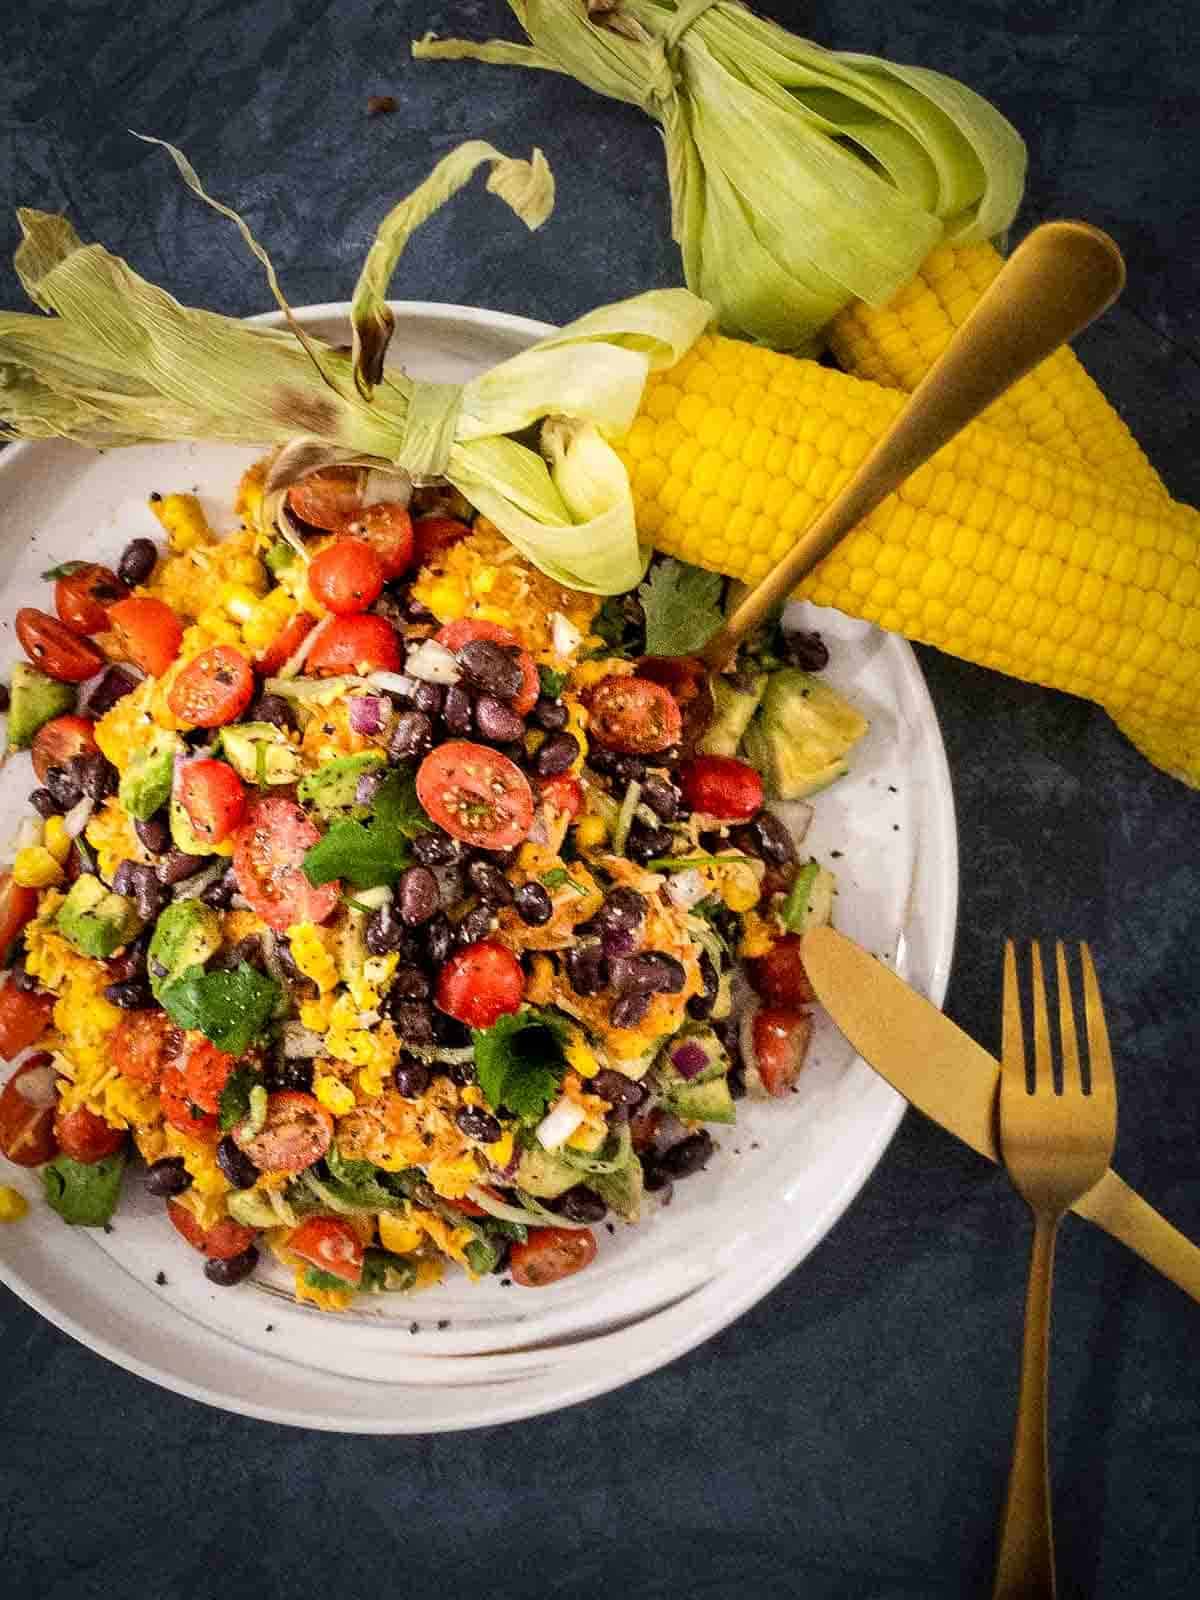 Parmesan Chipotle Corn Salad with Black Beans on a white plate with gold cutlery and 2 corn on the cobs